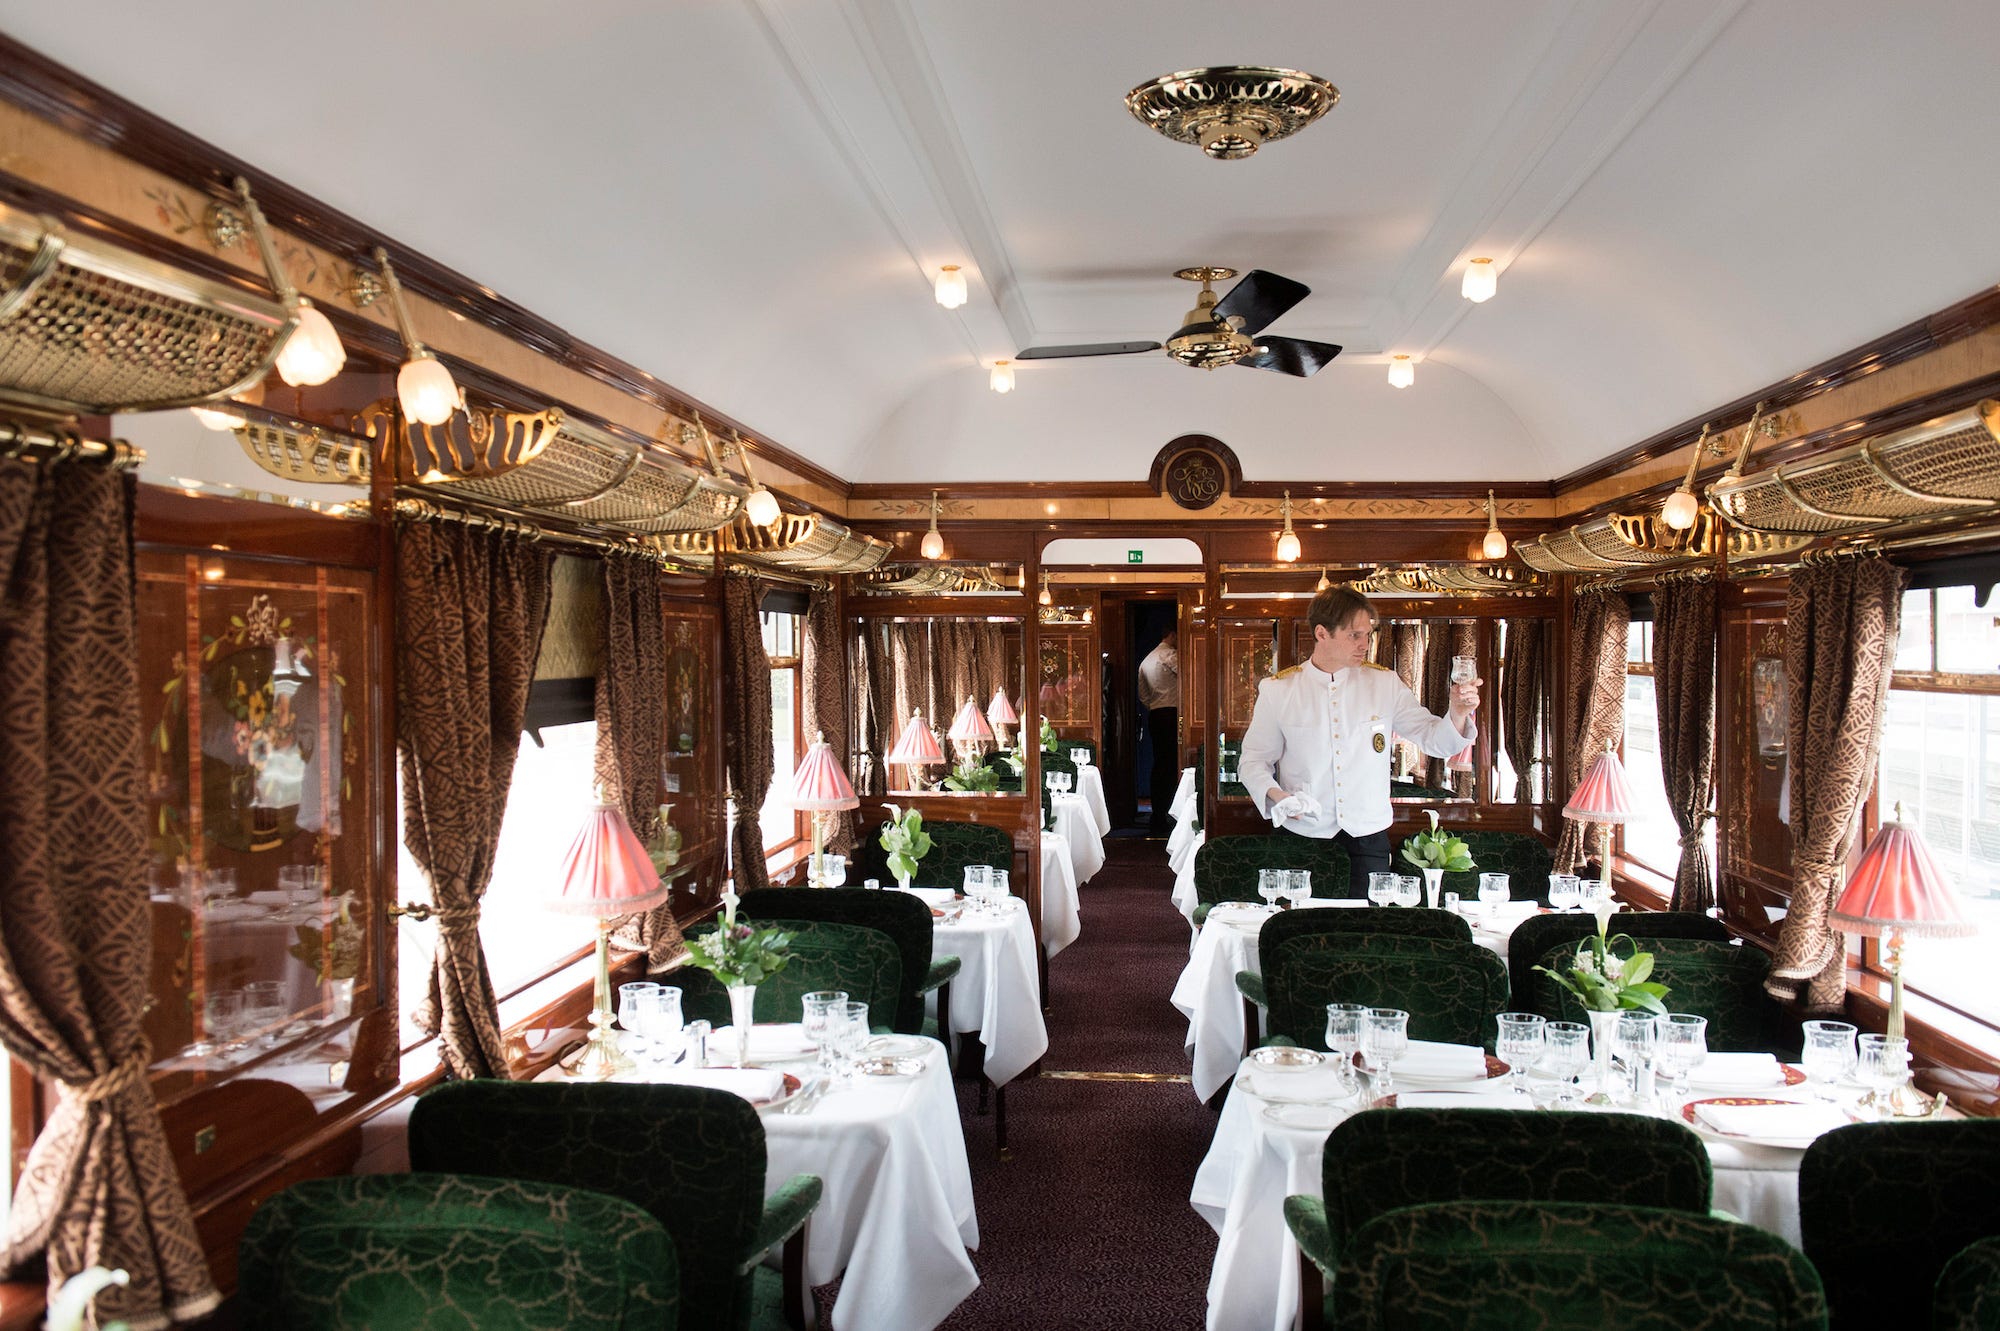 <p><strong>Country</strong>: Multiple, including the UK and Italy</p><p><strong>Duration of trip</strong>: 1 to 5 nights</p><p><strong>Description: </strong>The revived Orient Express transports riders to the golden age of rail travel, with its four-course dinners and black-tie glamour. It offers a variety of overnight trips to over a dozen European cities, including Paris, London, Vienna, Venice, and Istanbul. </p><p><strong>Cost: </strong>Between $6,800 and $48,000, approximately</p><p><em>Source: <a href="https://www.belmond.com/venice-simplon-orient-express/journeys/4_169373?cabinsAdults=2&date=14+Sep+2017" rel="nofollow noopener">Belmond</a></em></p>